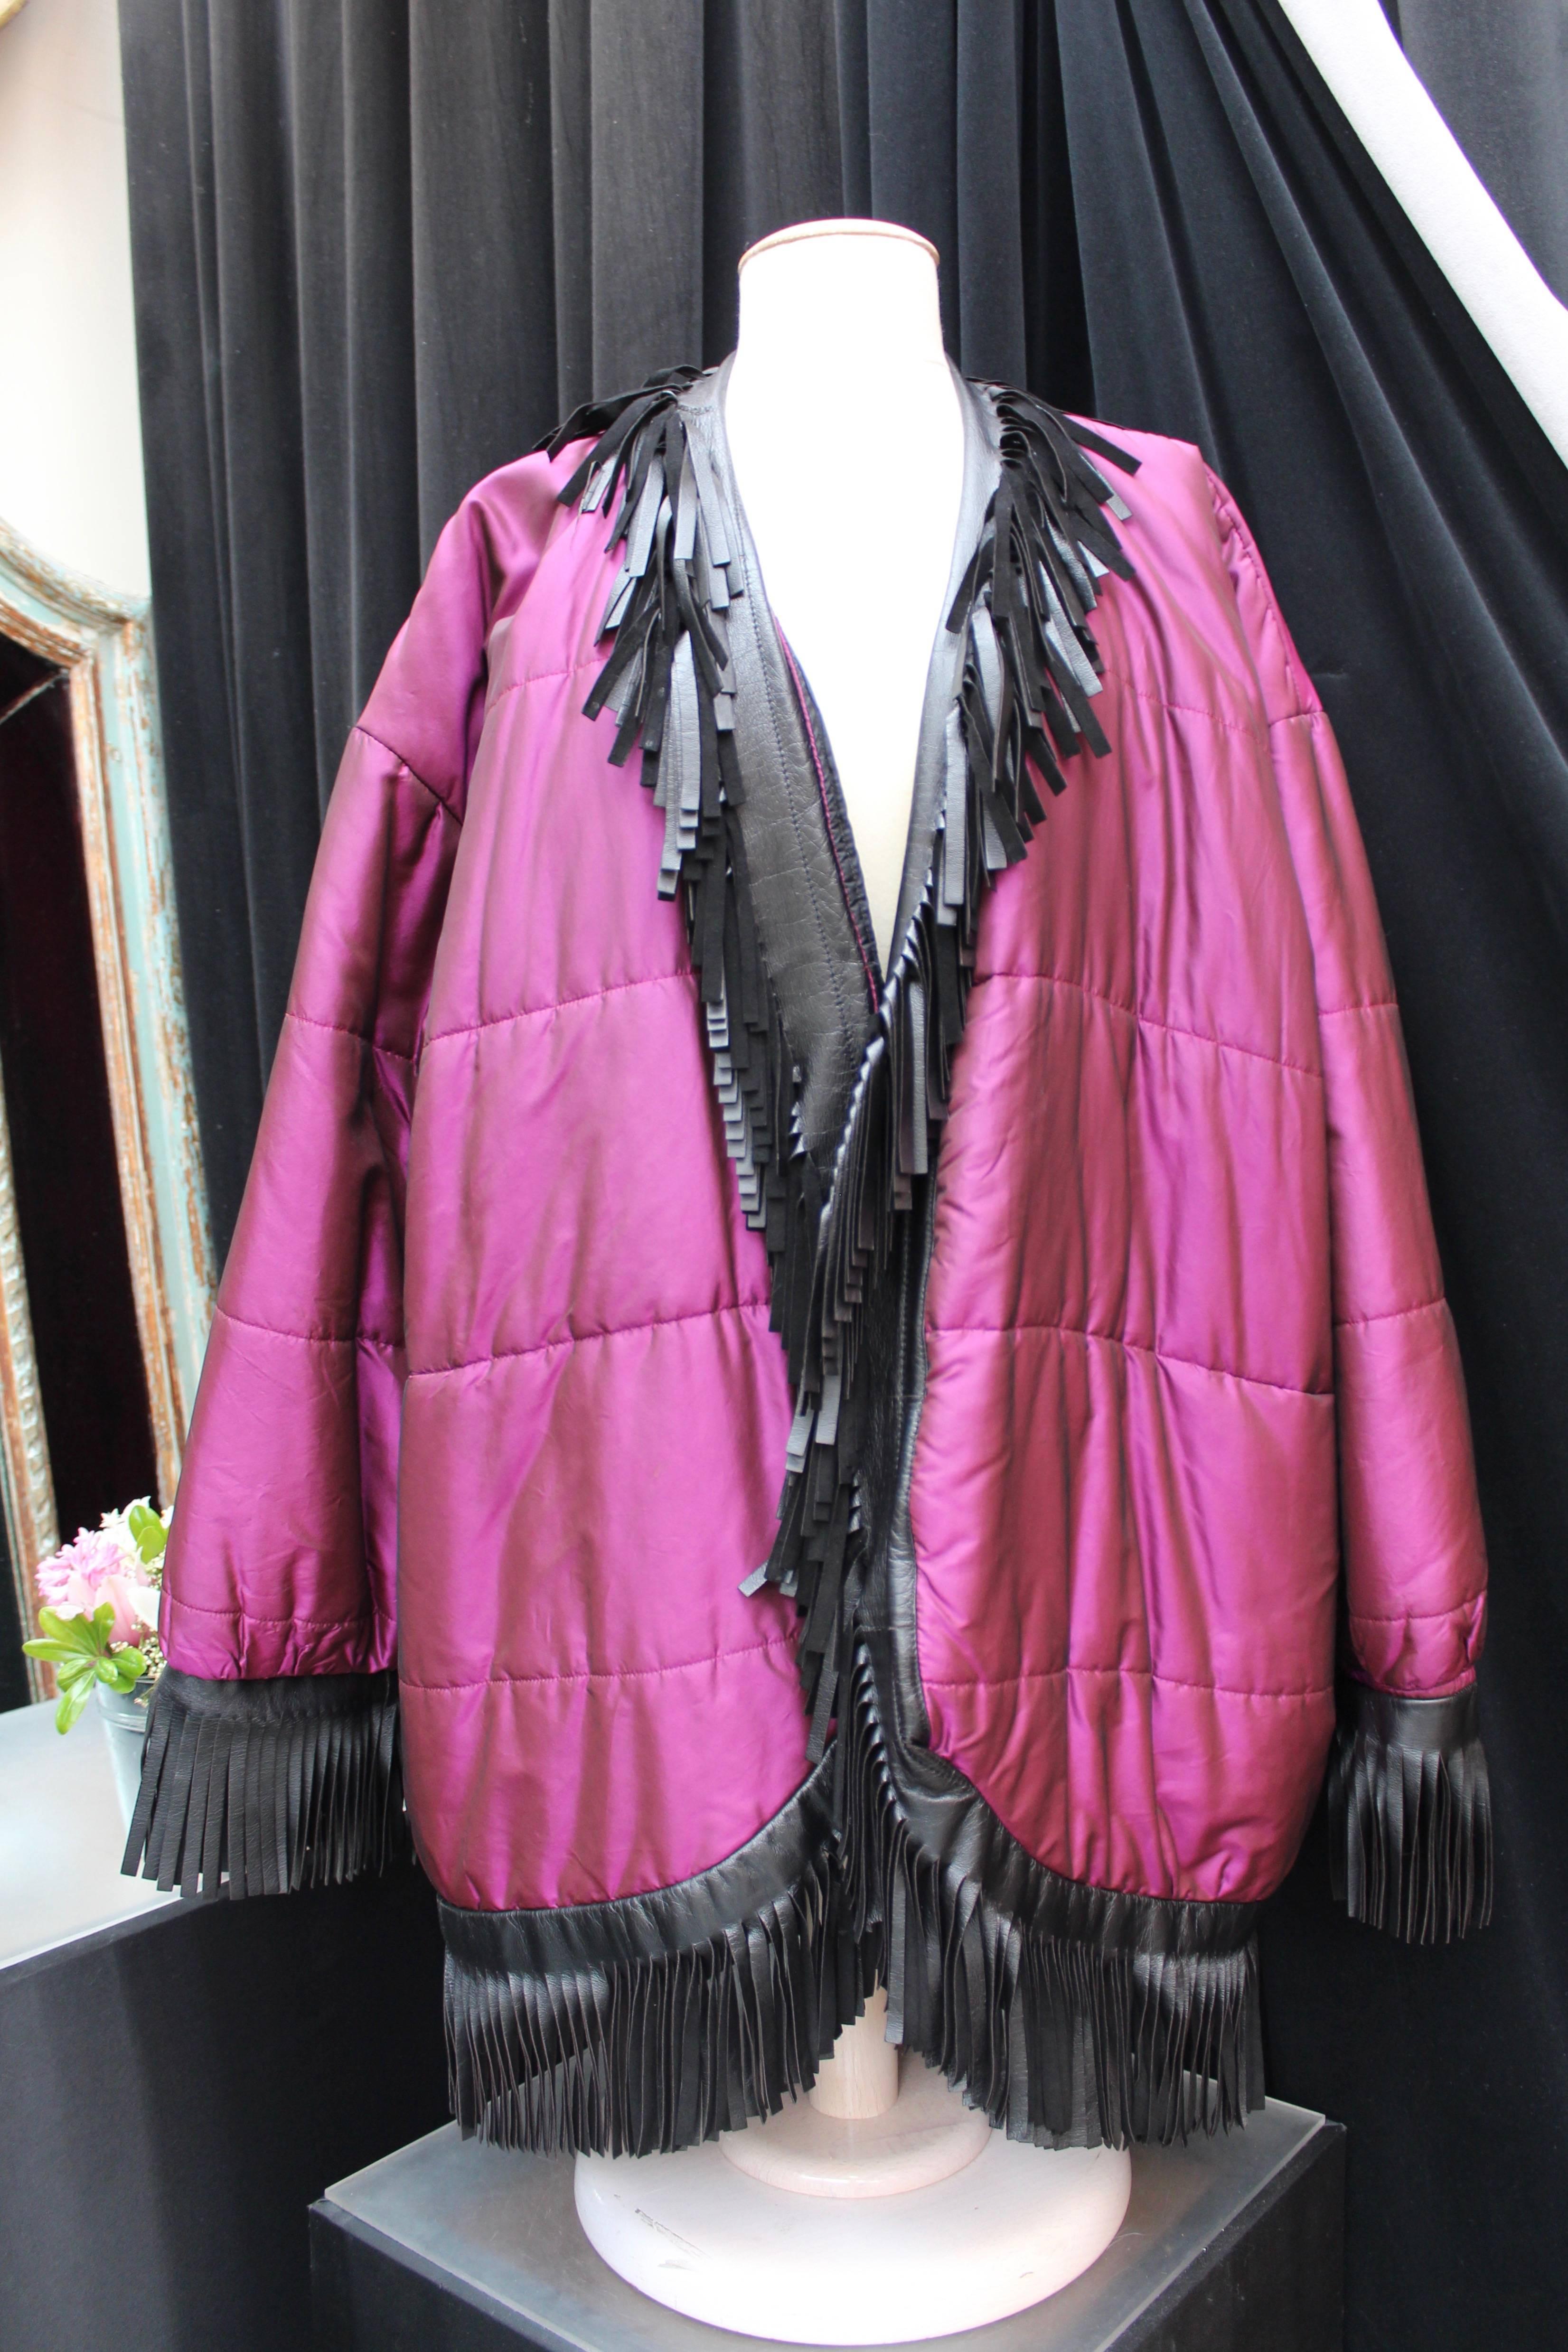 YVES SAINT LAURENT RIVE GAUCHE (Made in France) Long jacket composed of waterproof glossy metallic purple fabric. It is trimmed with black leather fringes. Black glossy lining.

Circa 1985-1990.

Indicated size 44 but can also fit a 46 (US 12/14